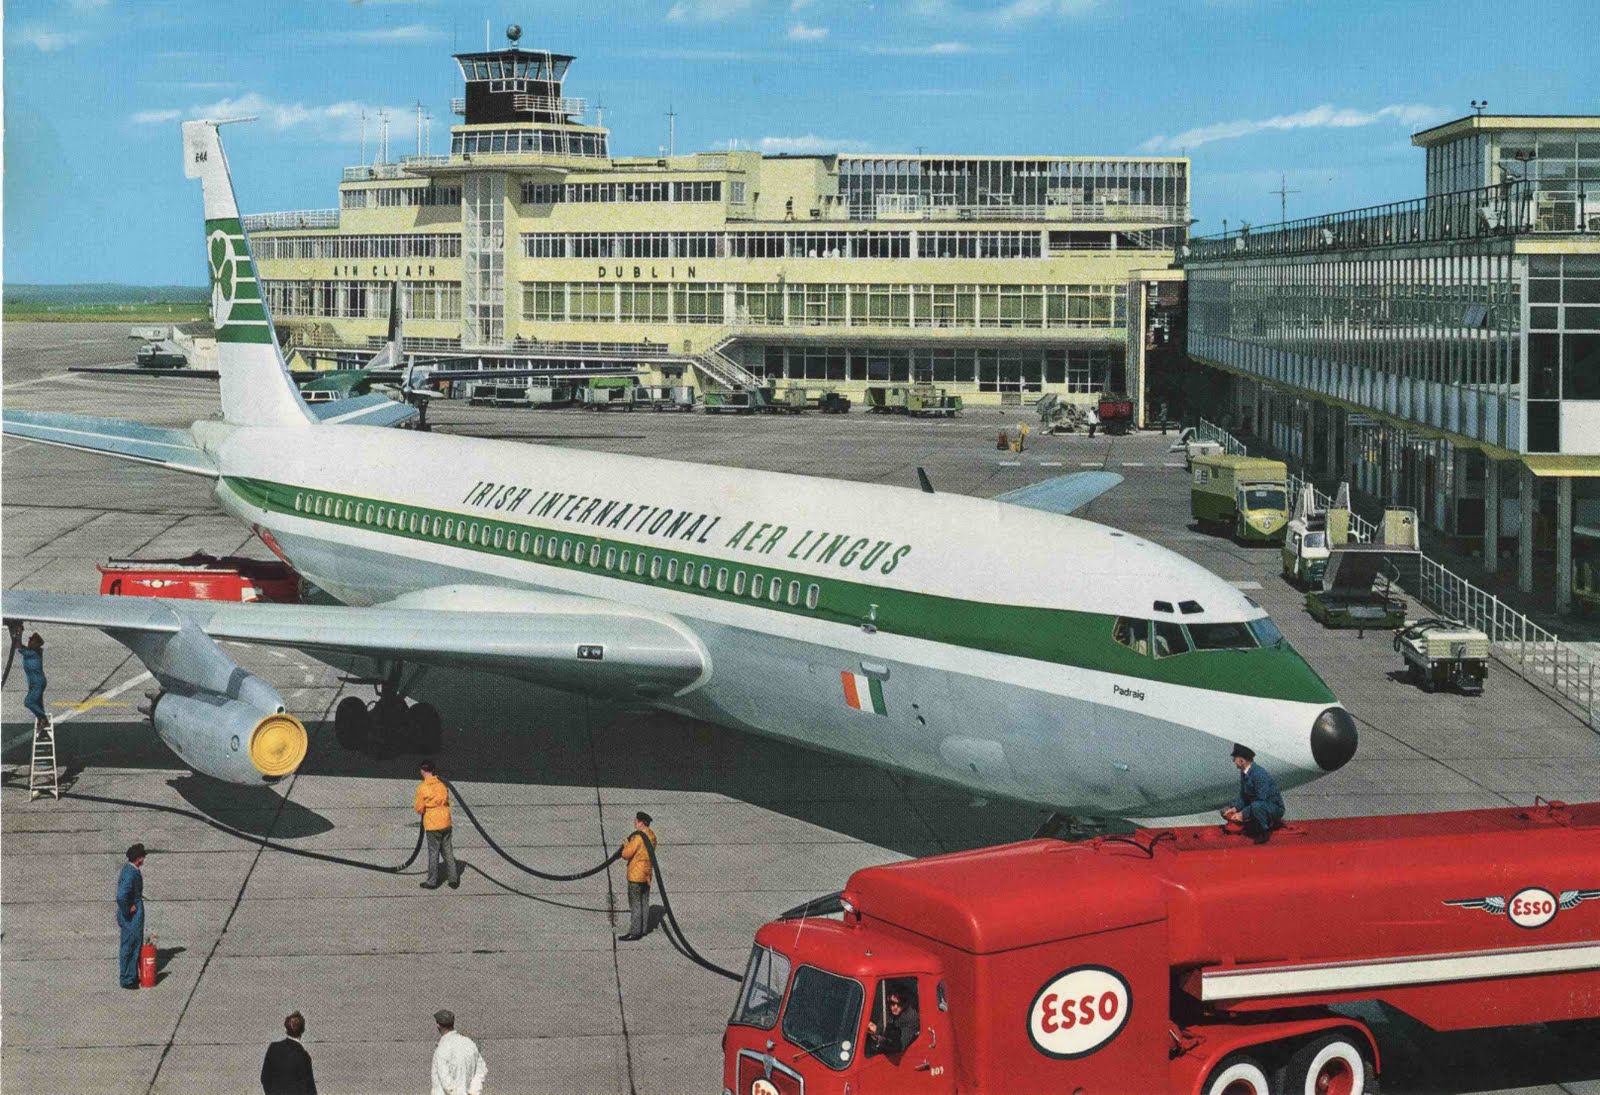 NewMaguireNews: Dublin Airport 1960's